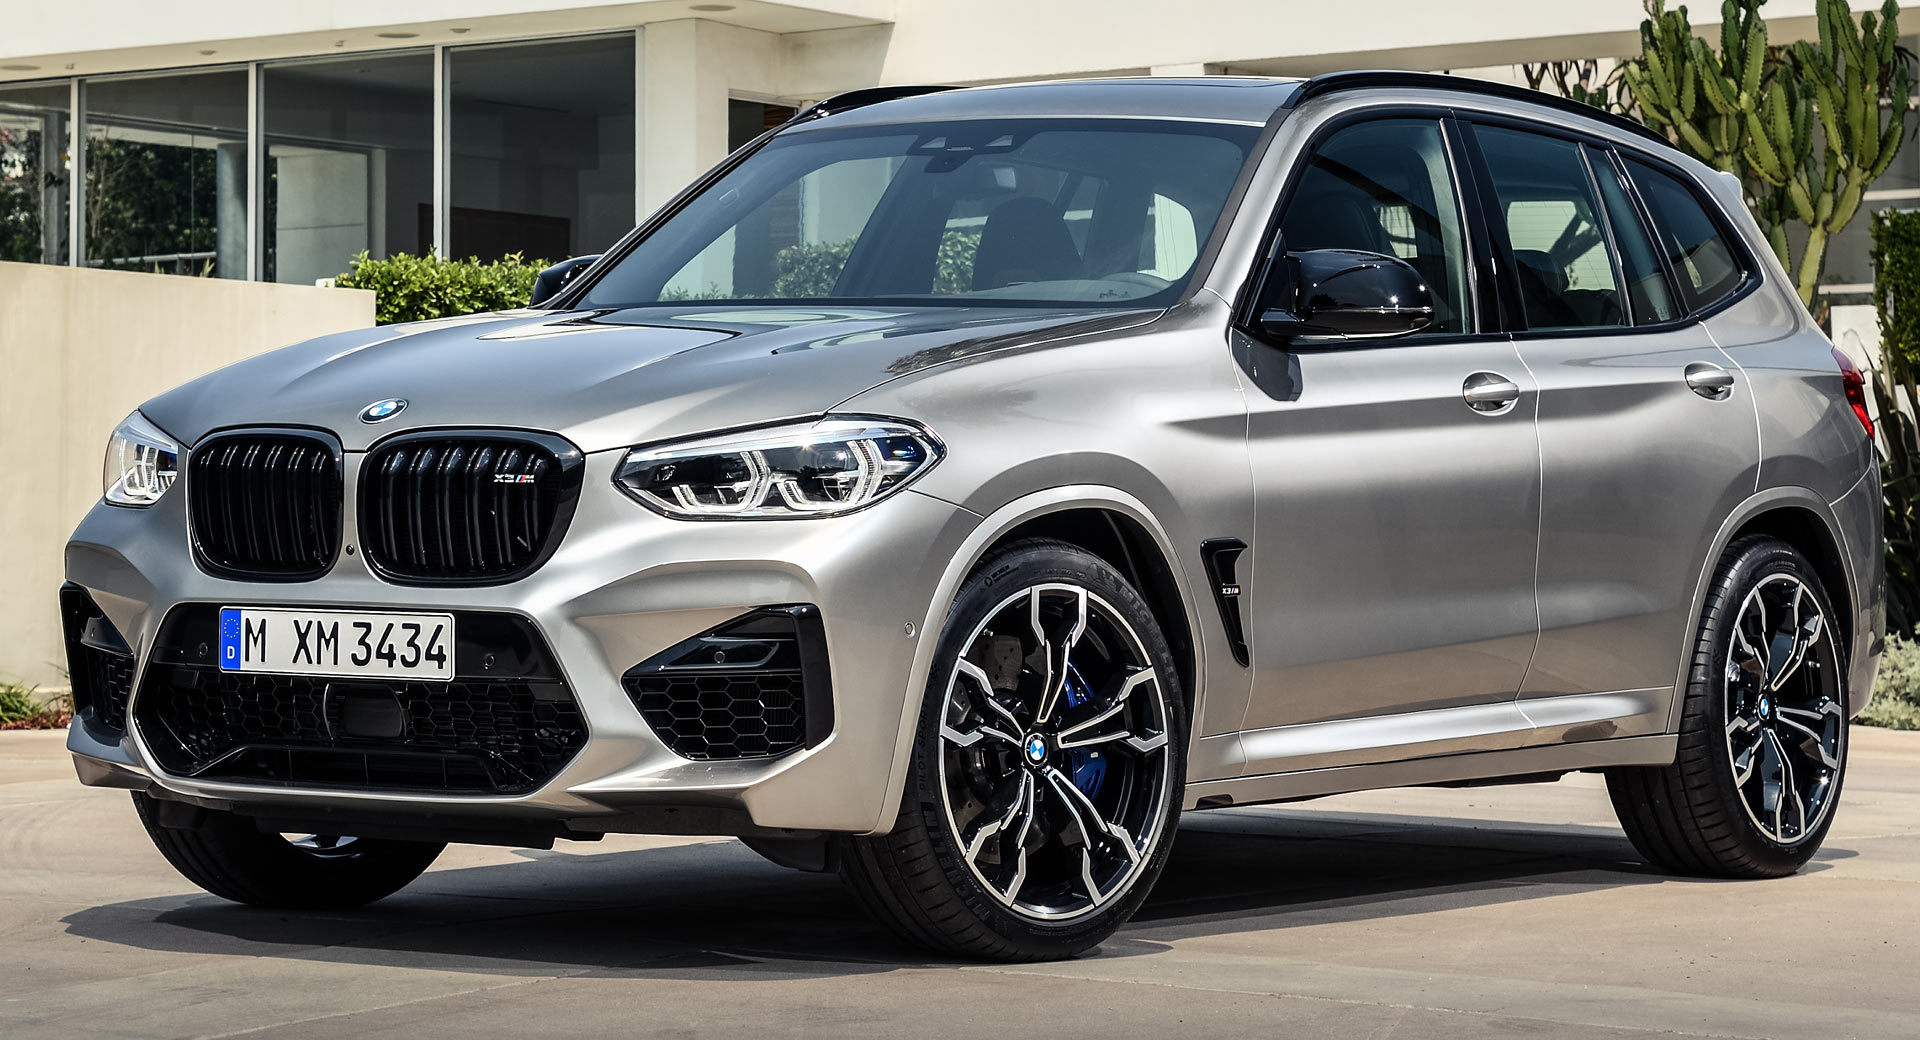 2020 BMW X3 M And X4 M Go Official, Rocket From 0-60 MPH In 4.1 Sec |  Carscoops